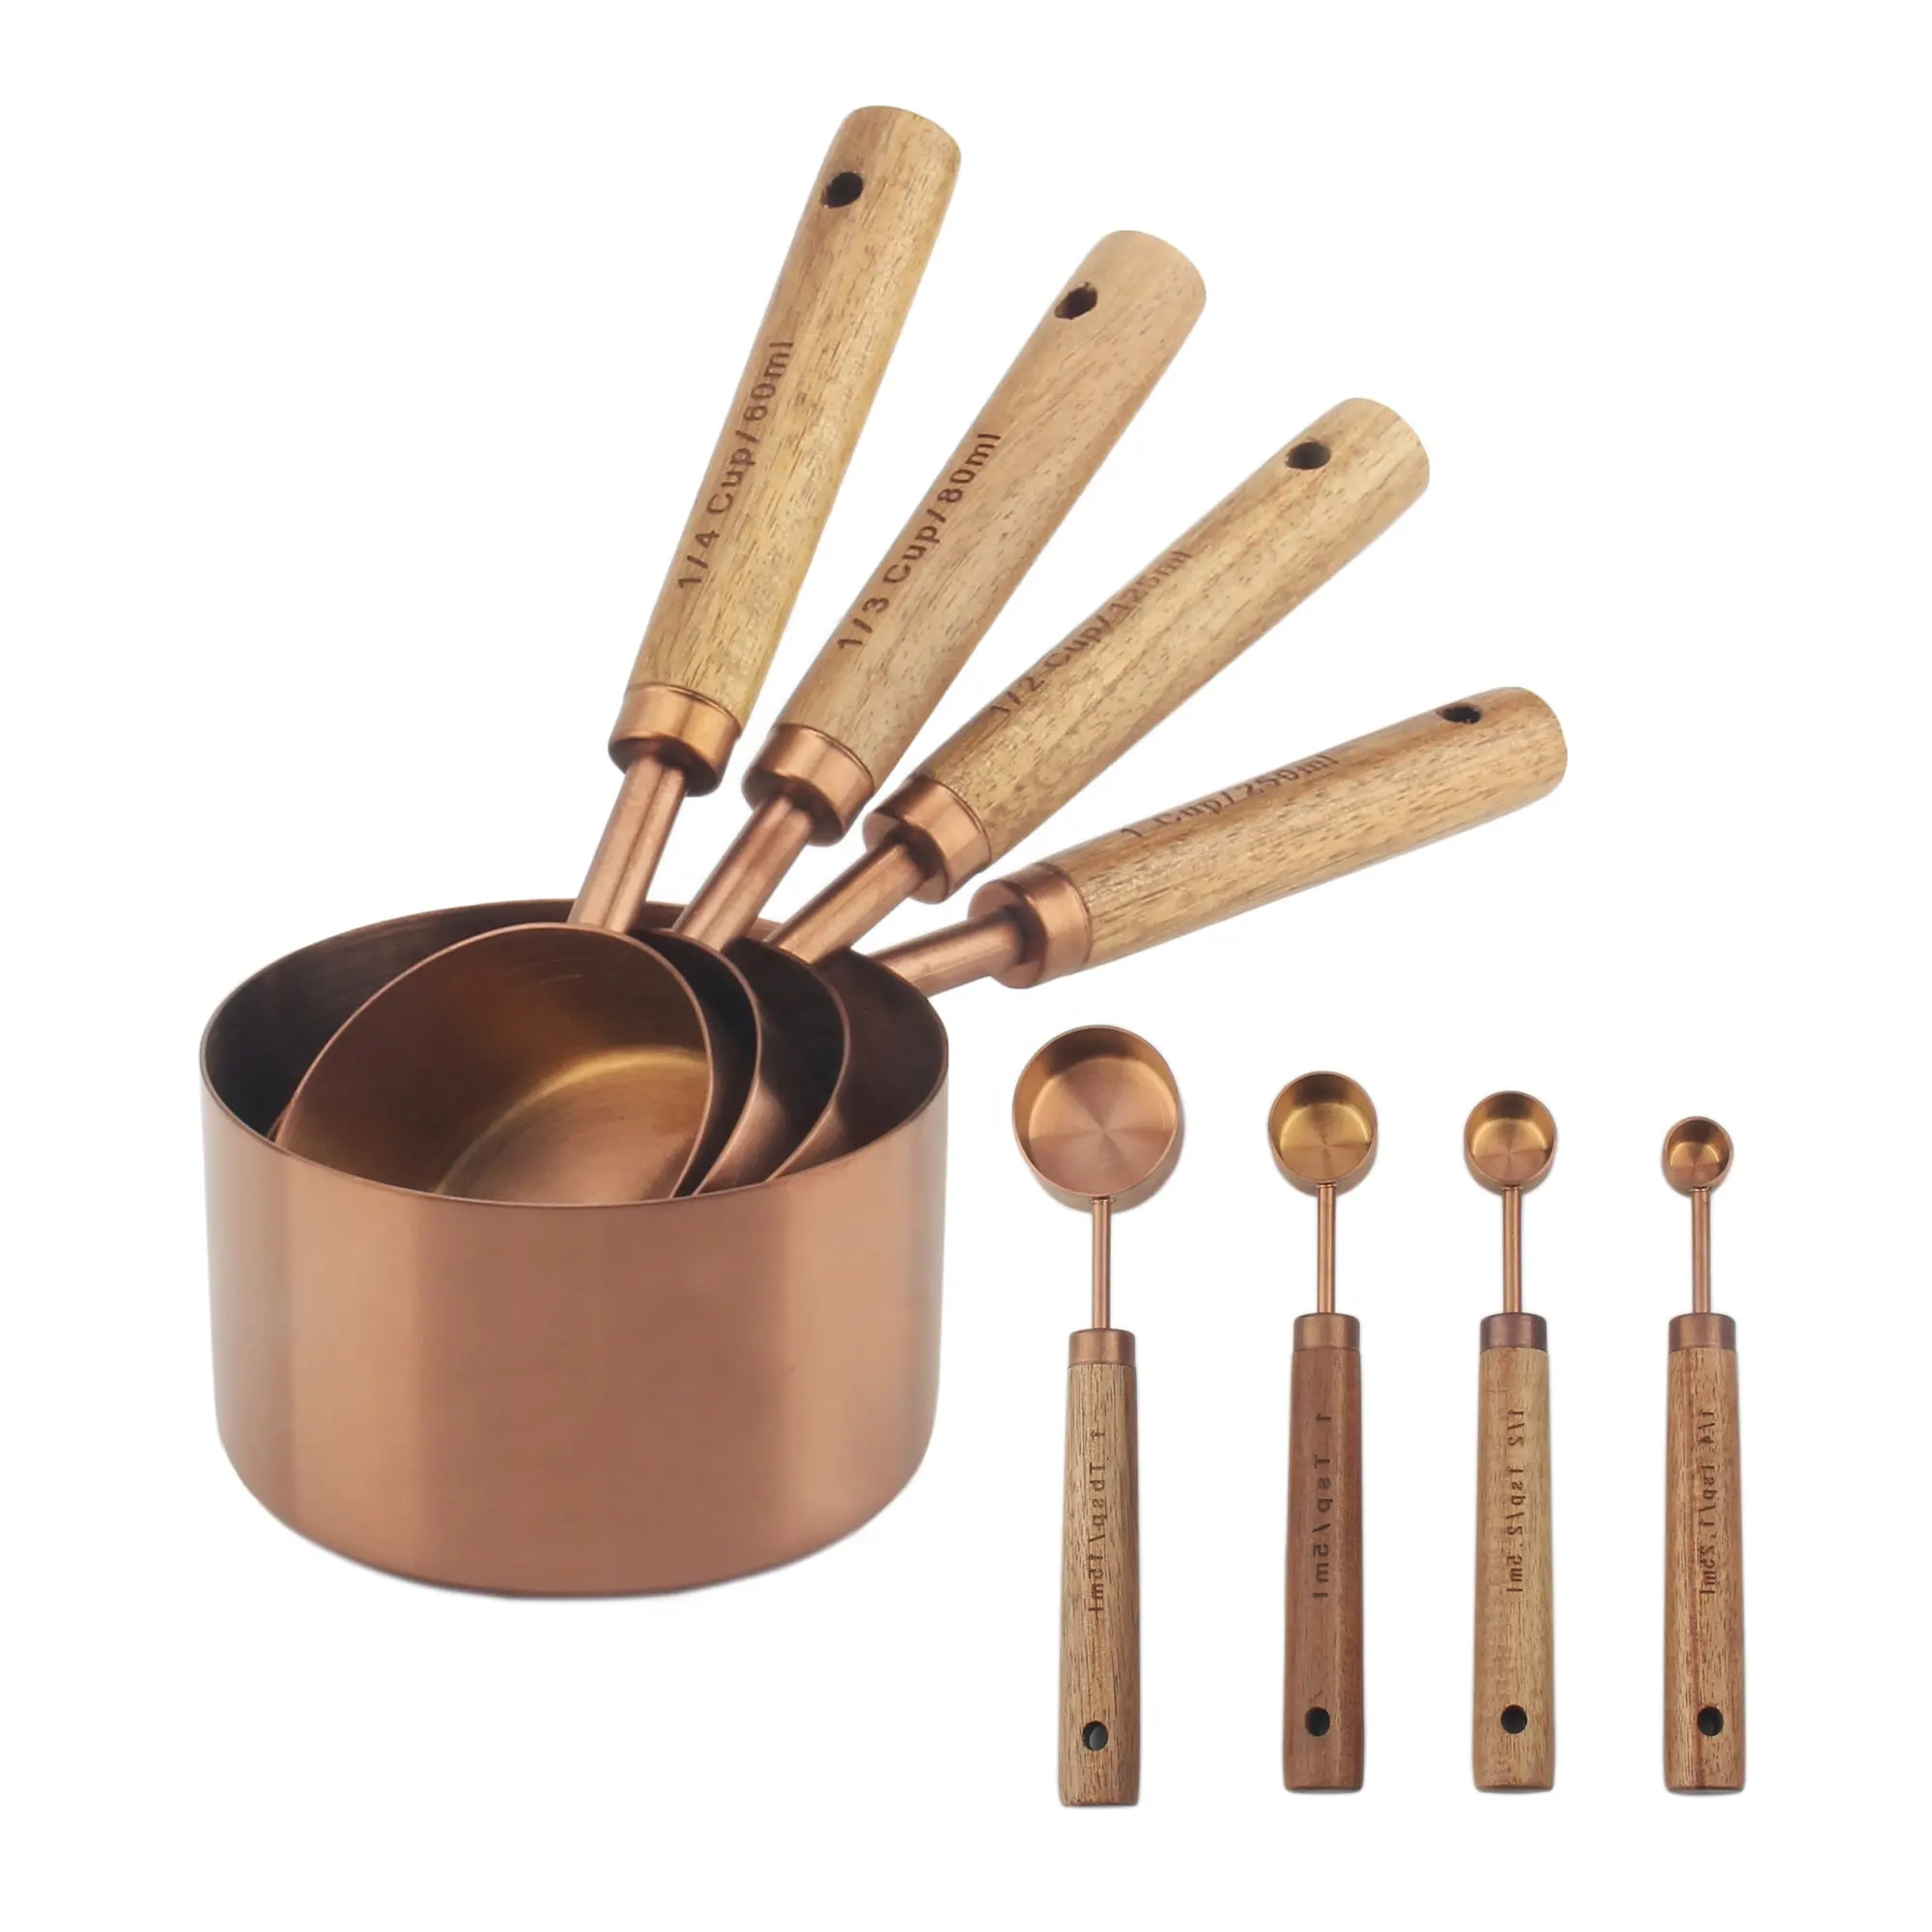 8 Pcs Stainless Steel Kitchen Accessories Rose Gold Copper Measuring Cups and Spoons Set with Wooden Handle